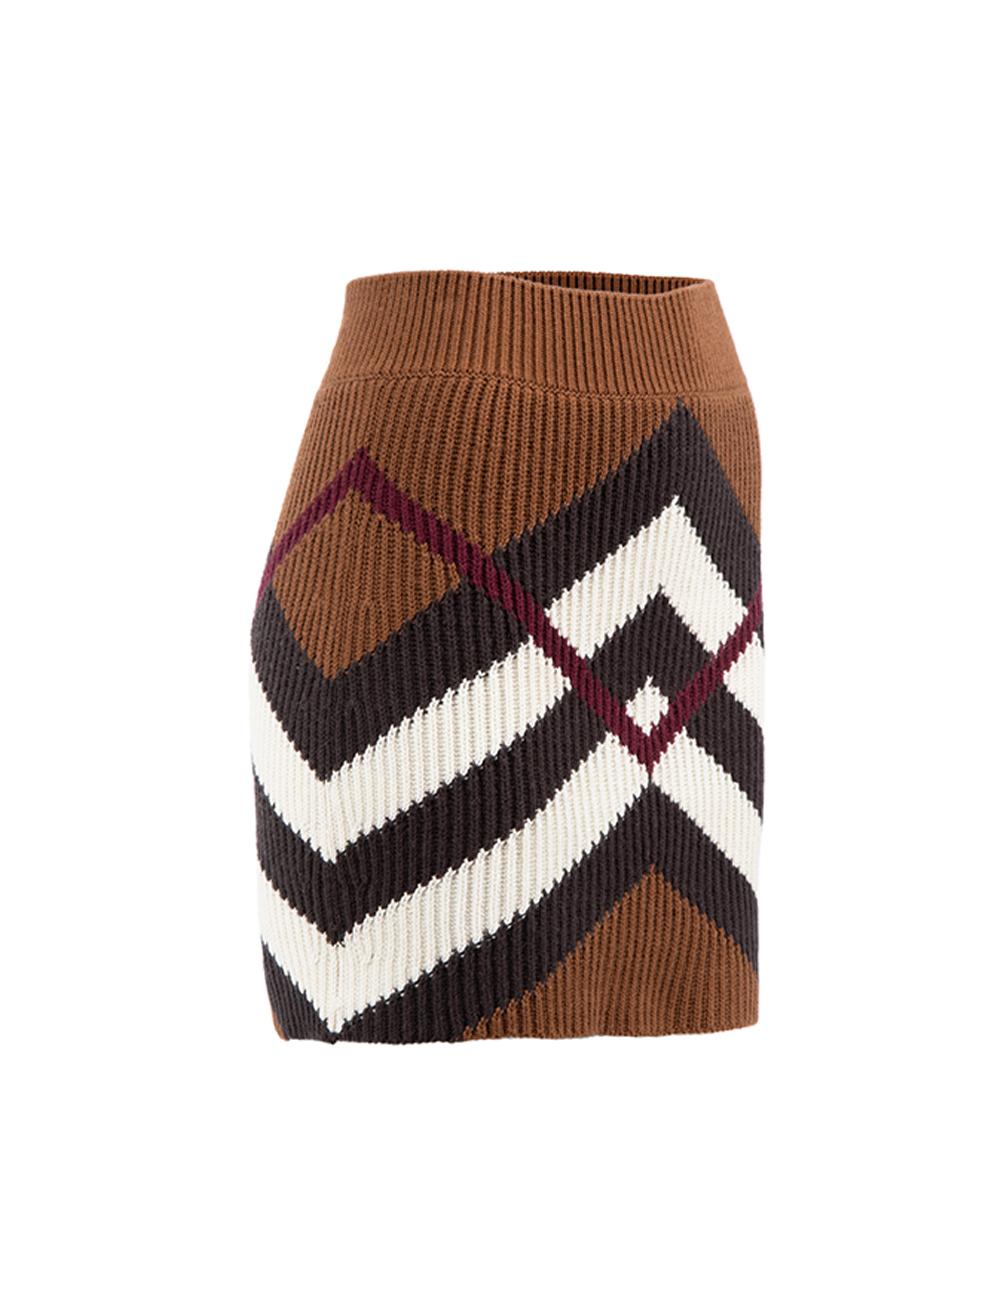 CONDITION is Never Worn. No visible wear to skirt is evident on this used Burberry designer resale item.



Details


Brown with white and burgundy

Cashmere, cotton

Figure-hugging

Mini skirt

Chevron pattern

Knit

Slip on





Made in